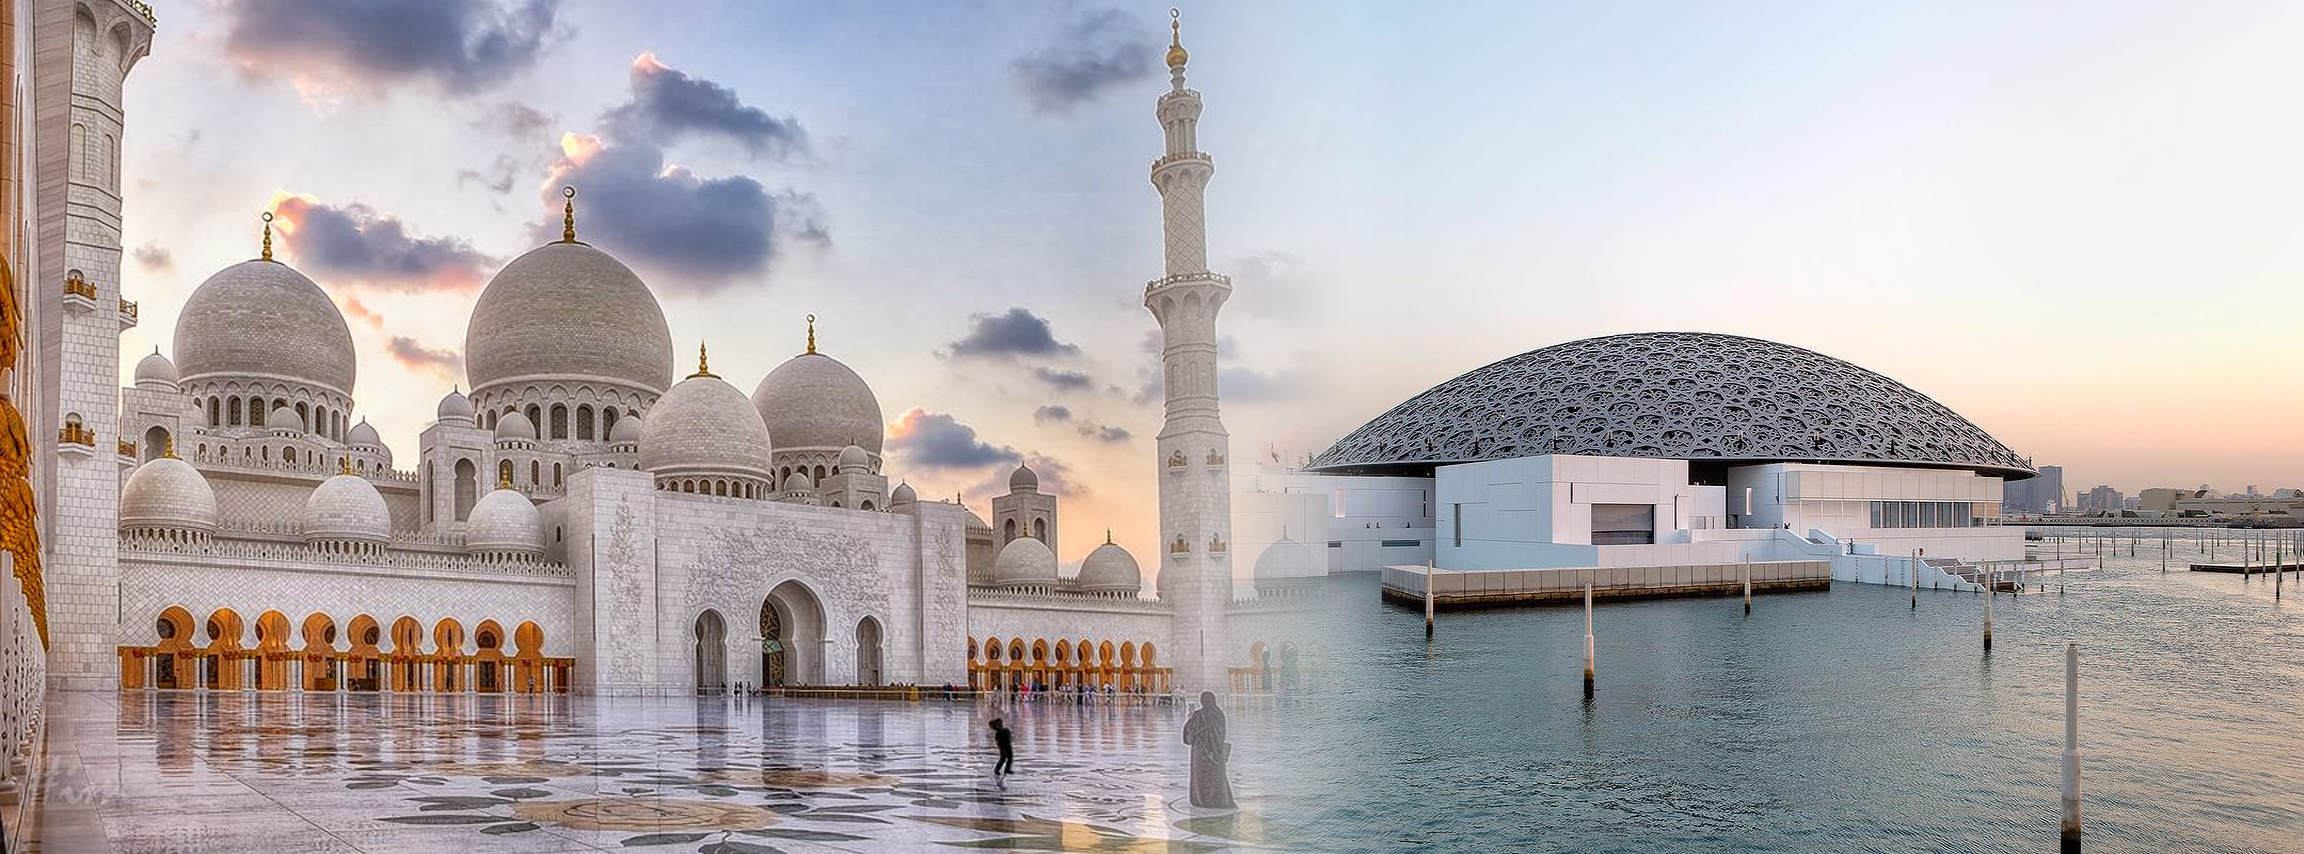 Abu Dhabi Zayed Grand Mosque + Louvre Museum